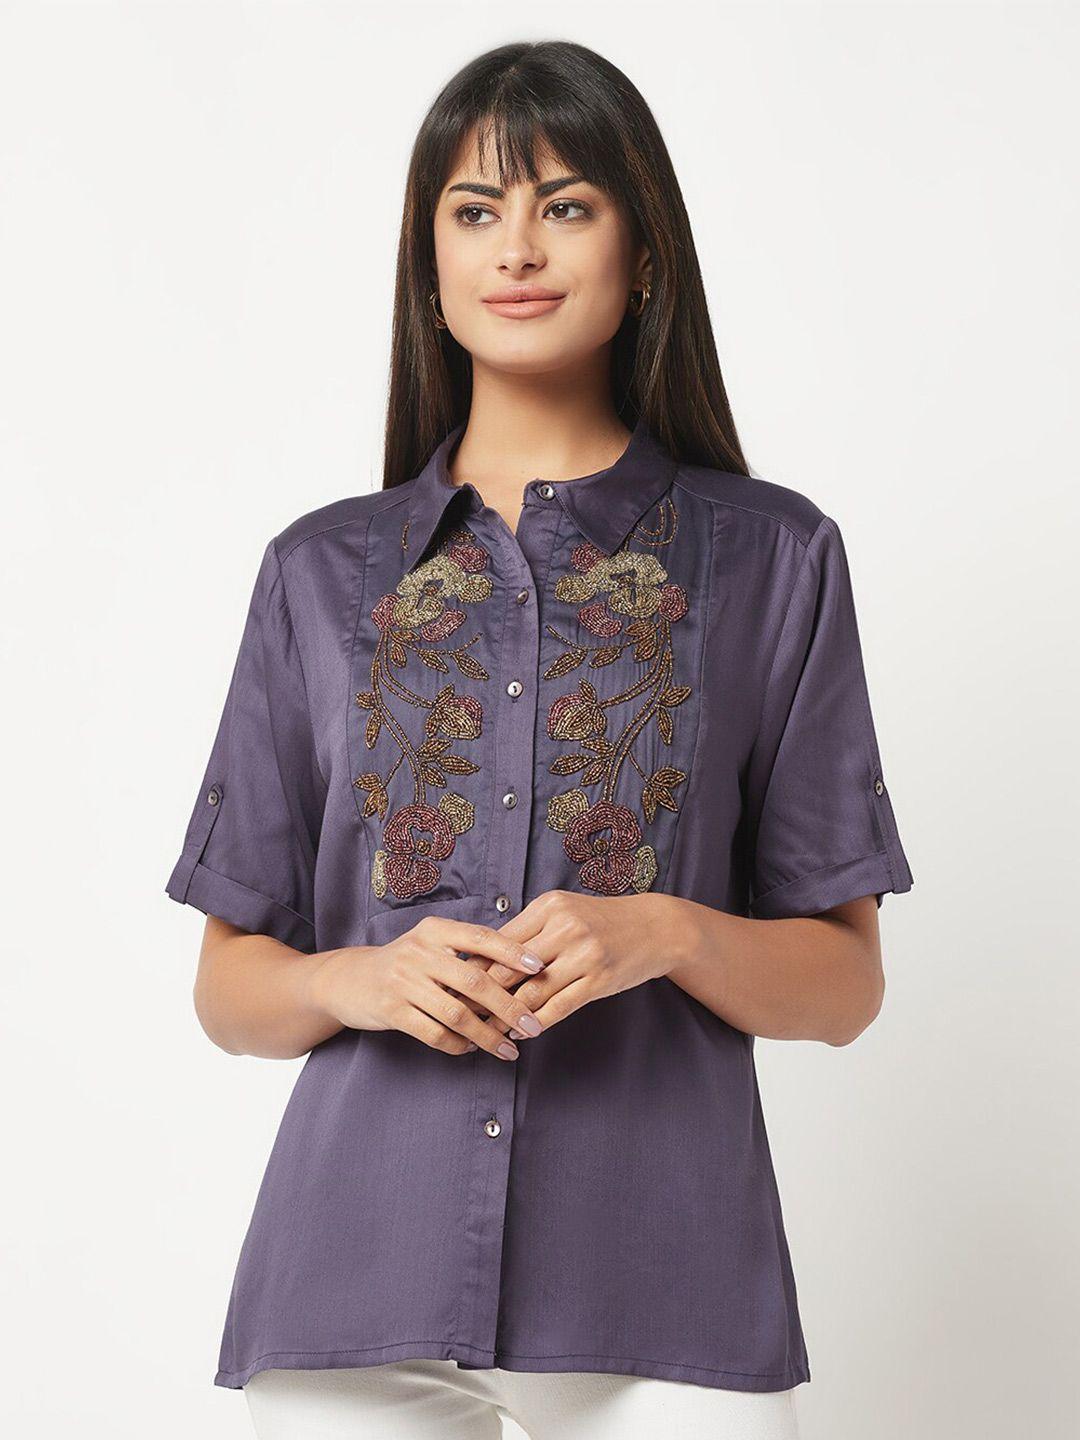 HOUSE OF S Floral Printed Embellished Casual Shirt